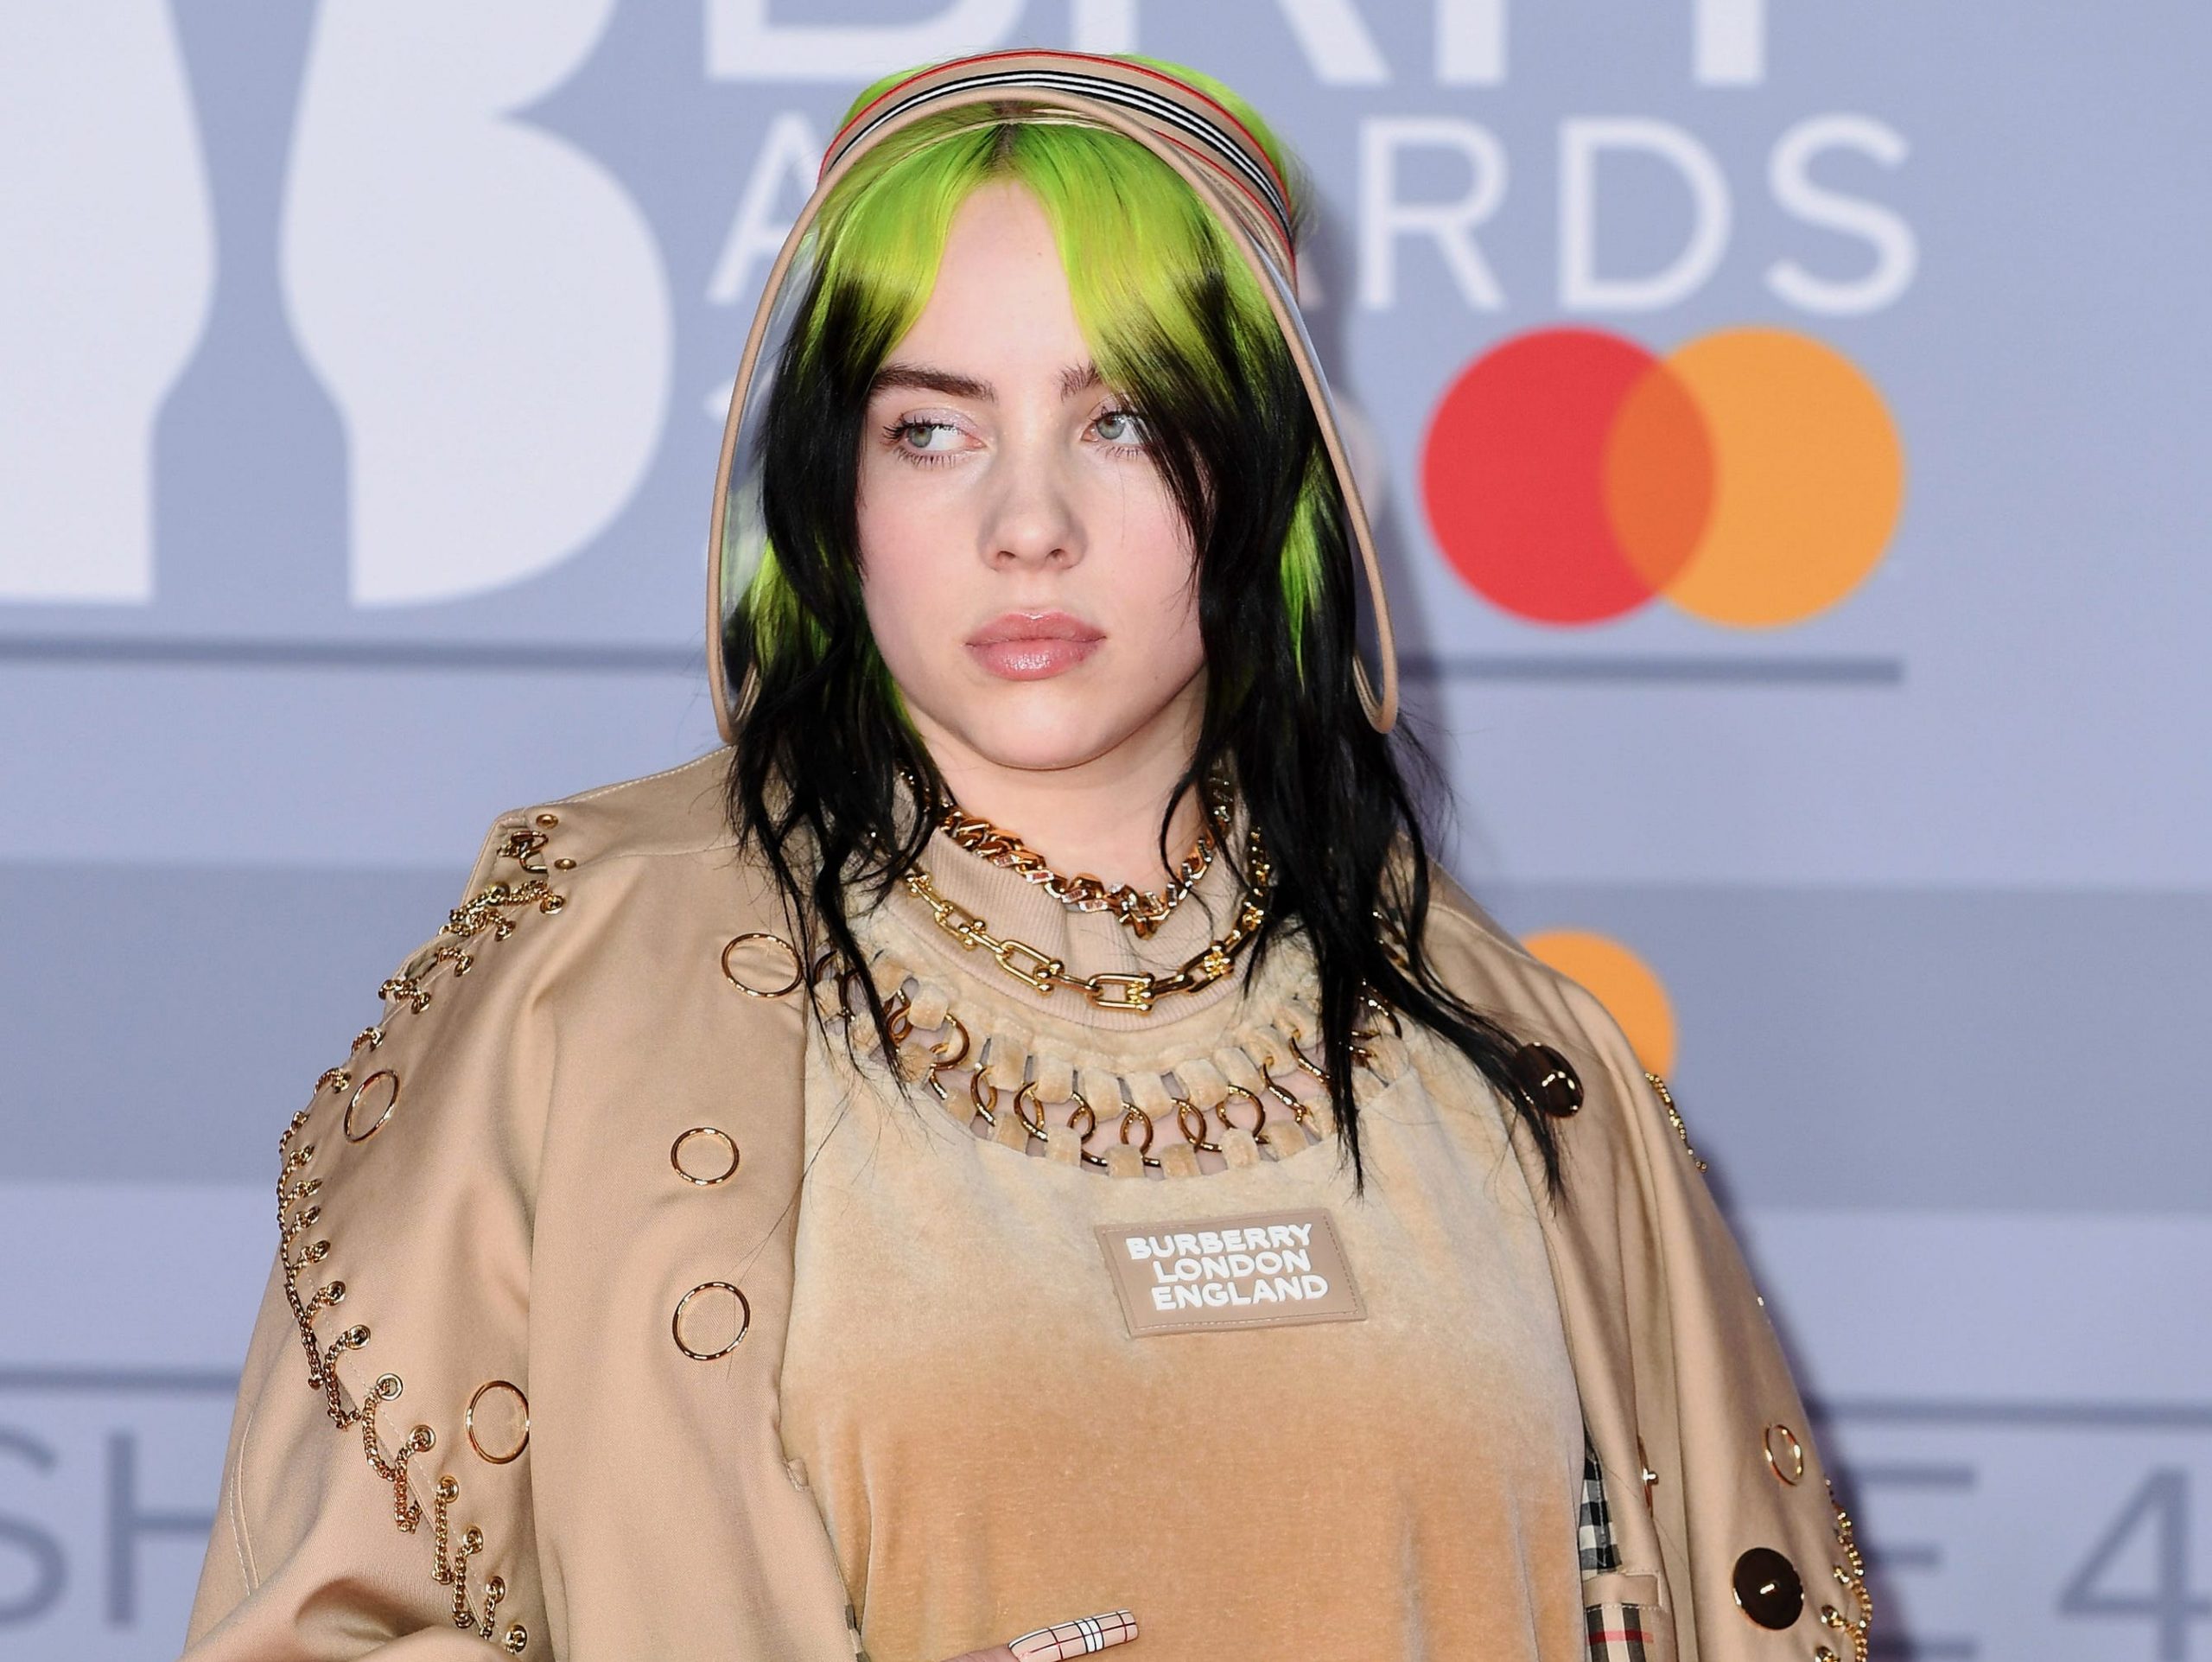 Billie Eilish jokes 'the whole internet is gaslighting me' because people  think her sneakers are pink and white